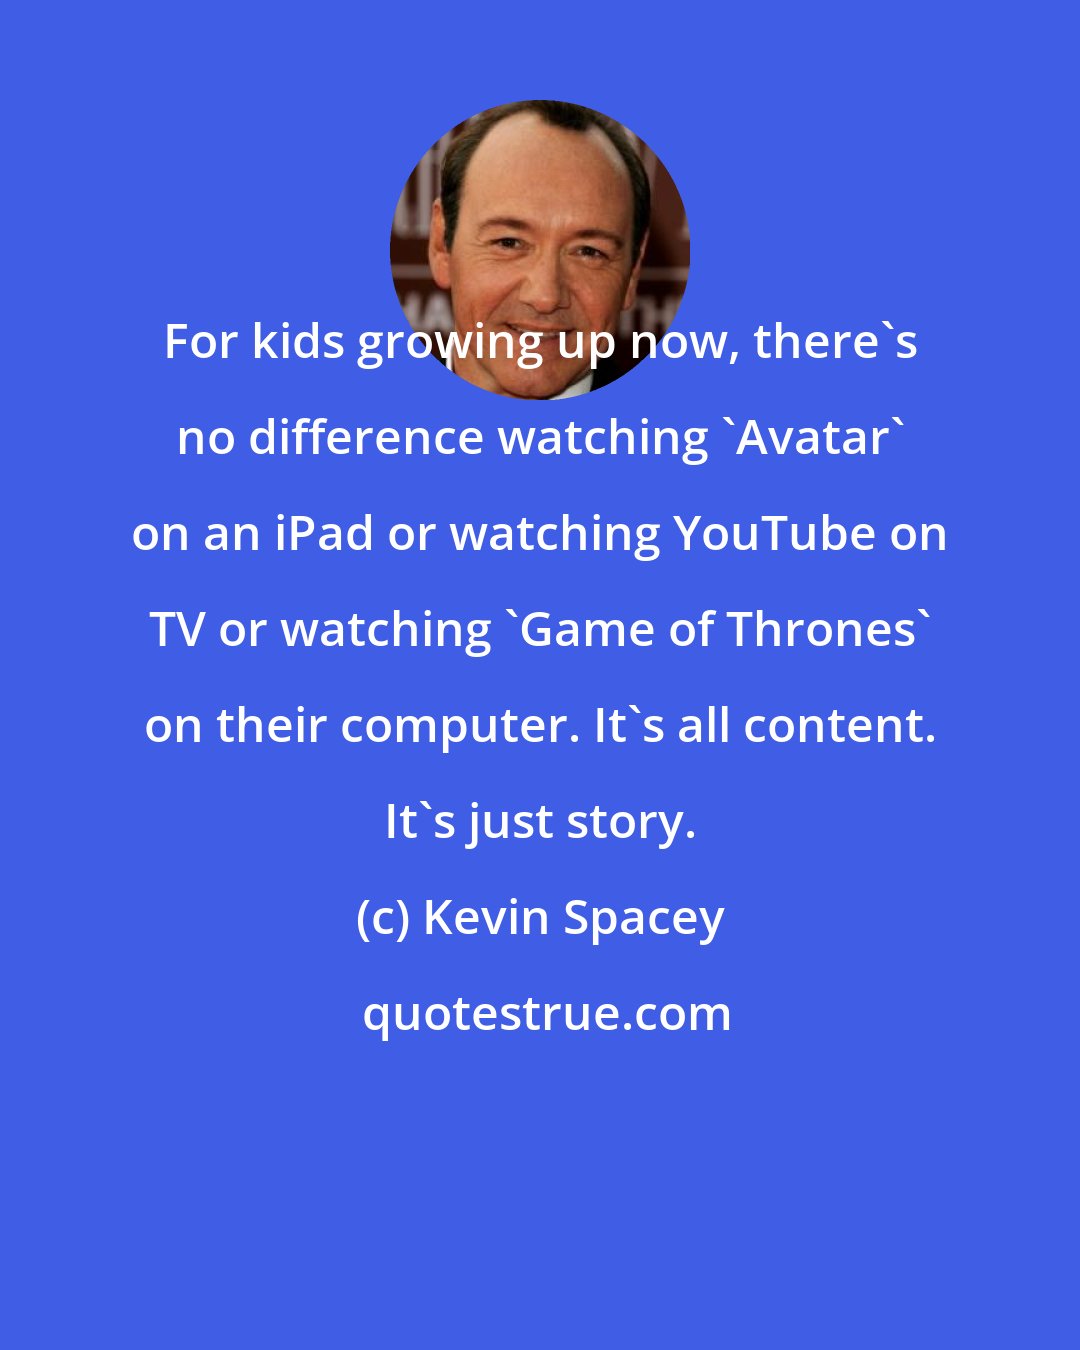 Kevin Spacey: For kids growing up now, there's no difference watching 'Avatar' on an iPad or watching YouTube on TV or watching 'Game of Thrones' on their computer. It's all content. It's just story.